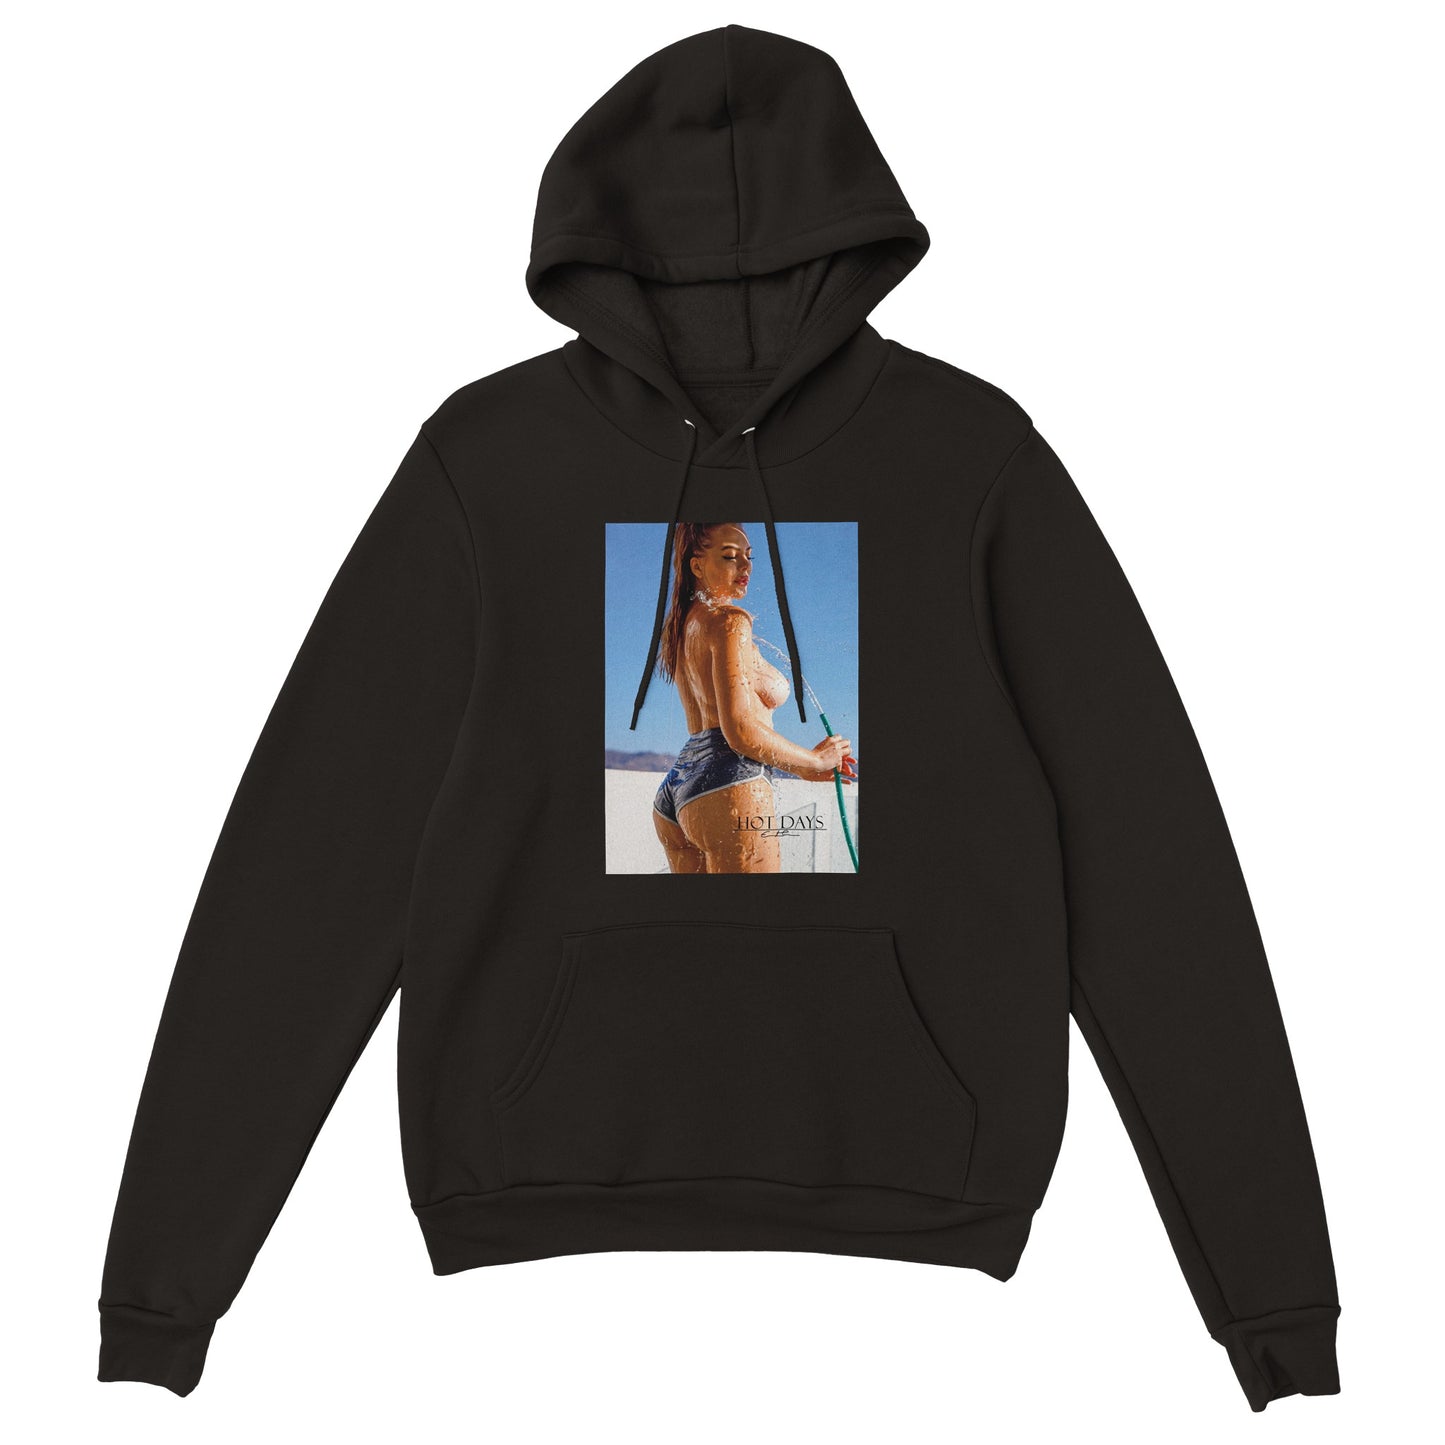 HOT DAYS Unisex Hoodie Color